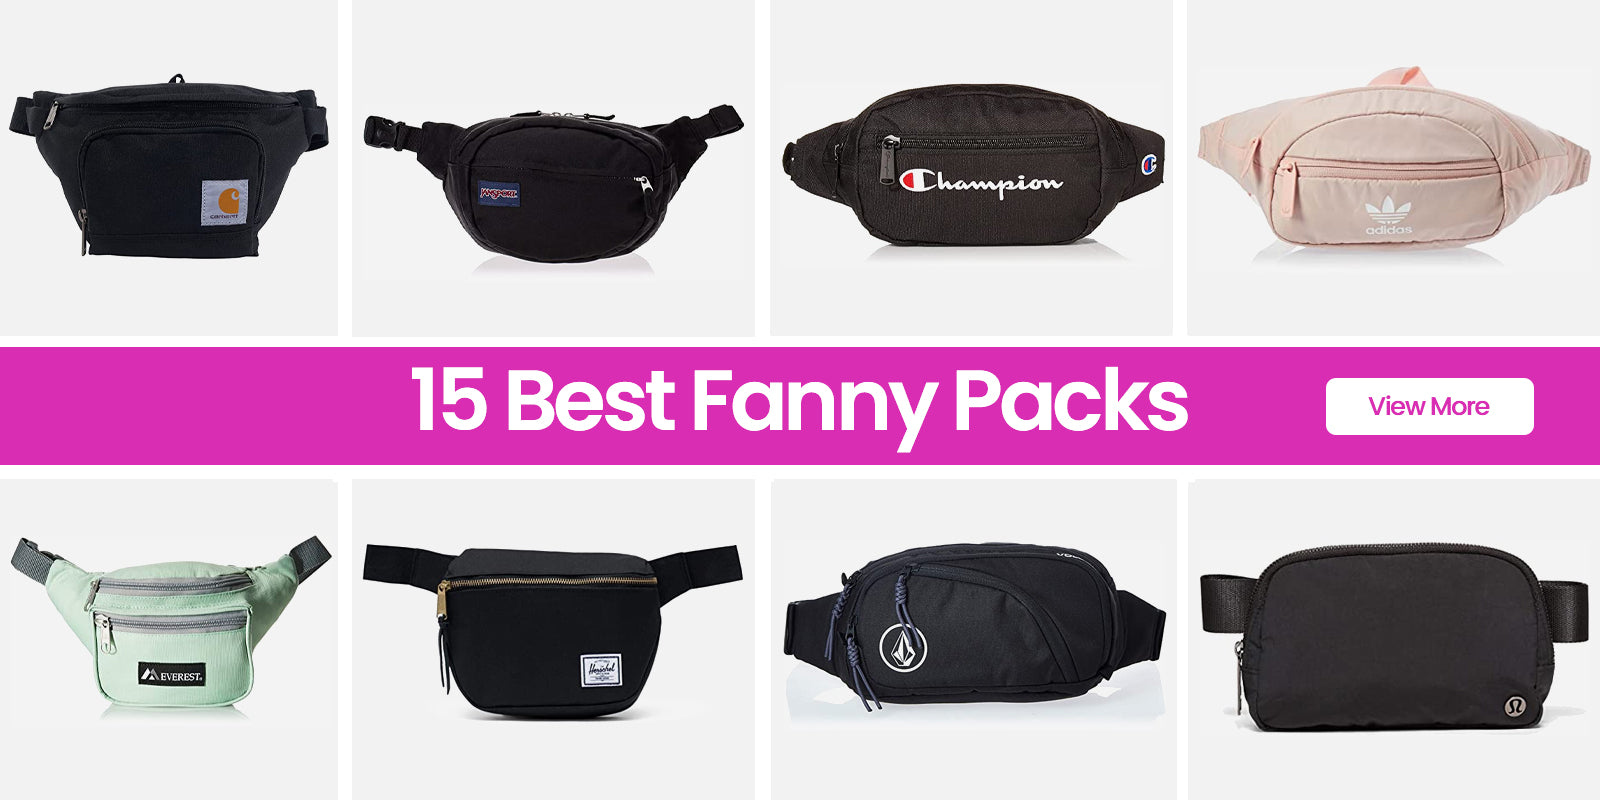 High-Fashion Fanny Packs To Add To Your 2022 Wish List